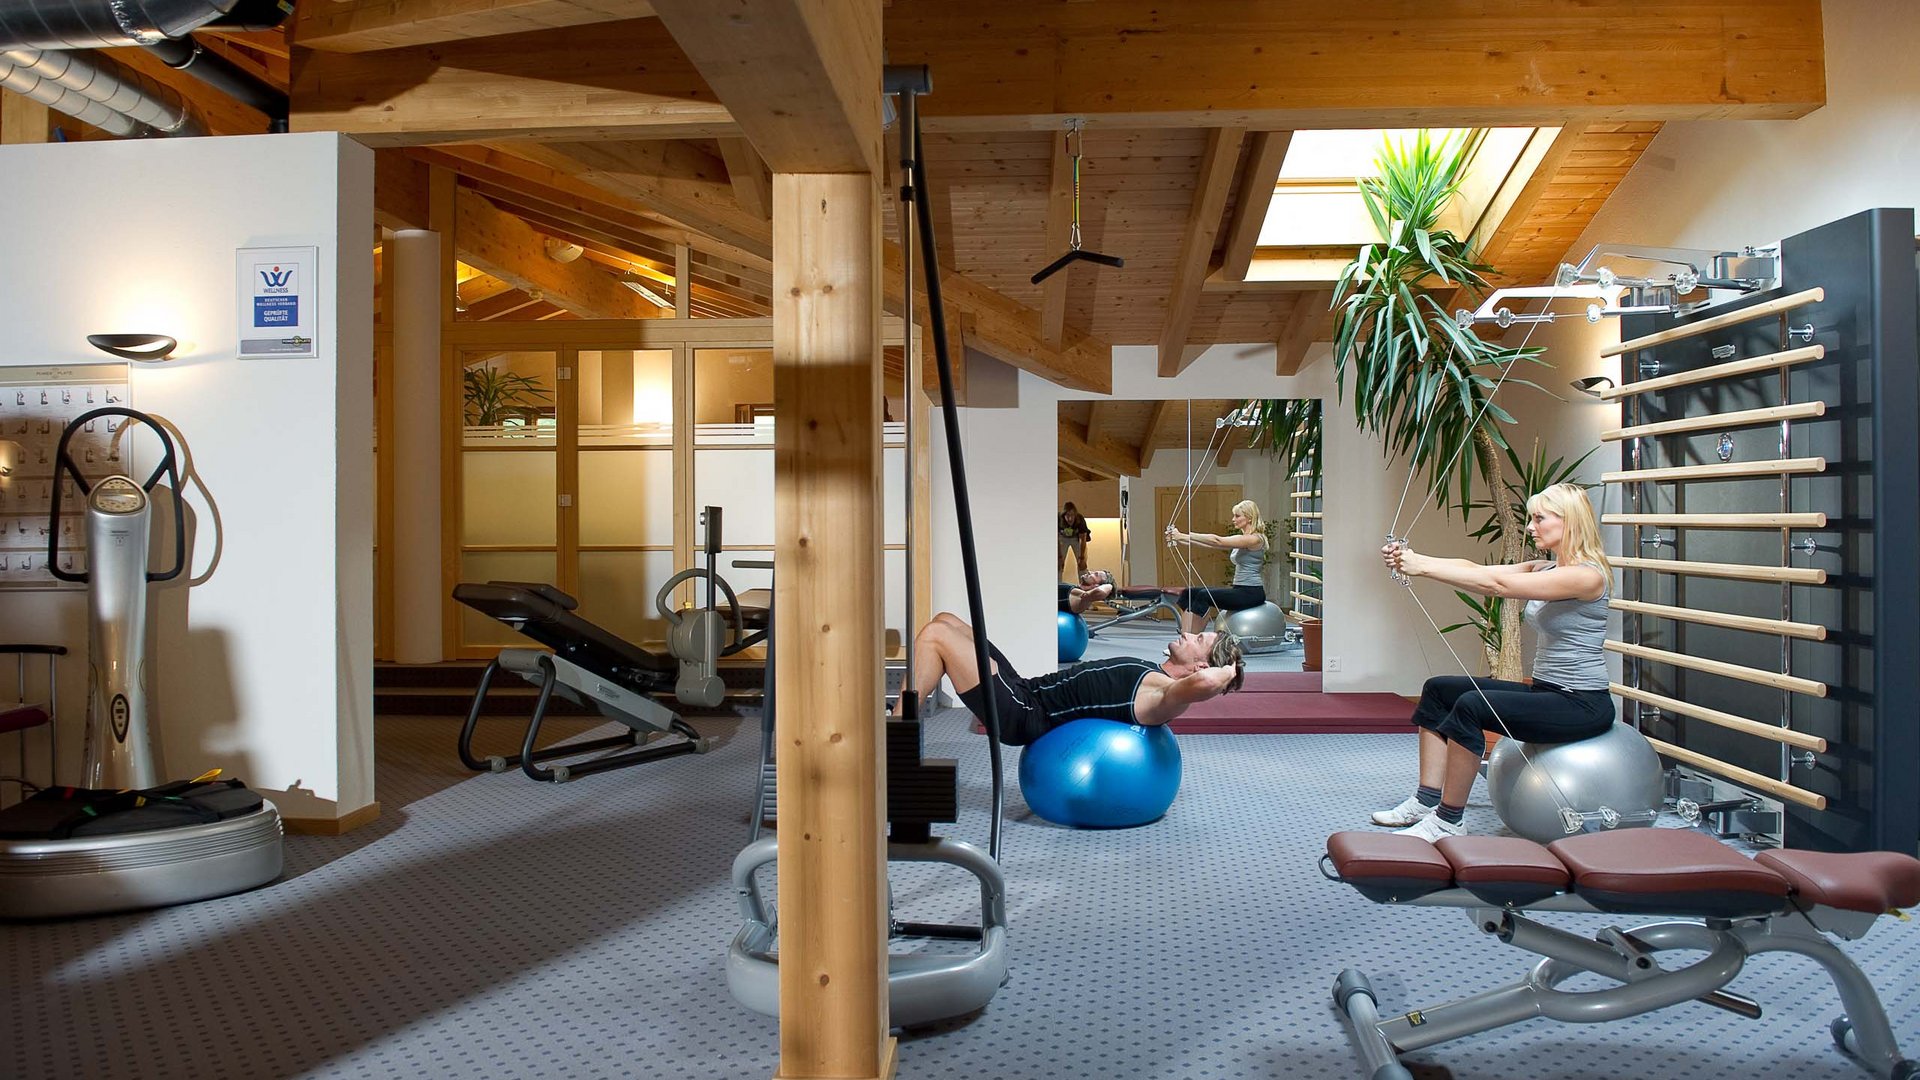 Get ready for cycling in Switzerland at our hotel with gym